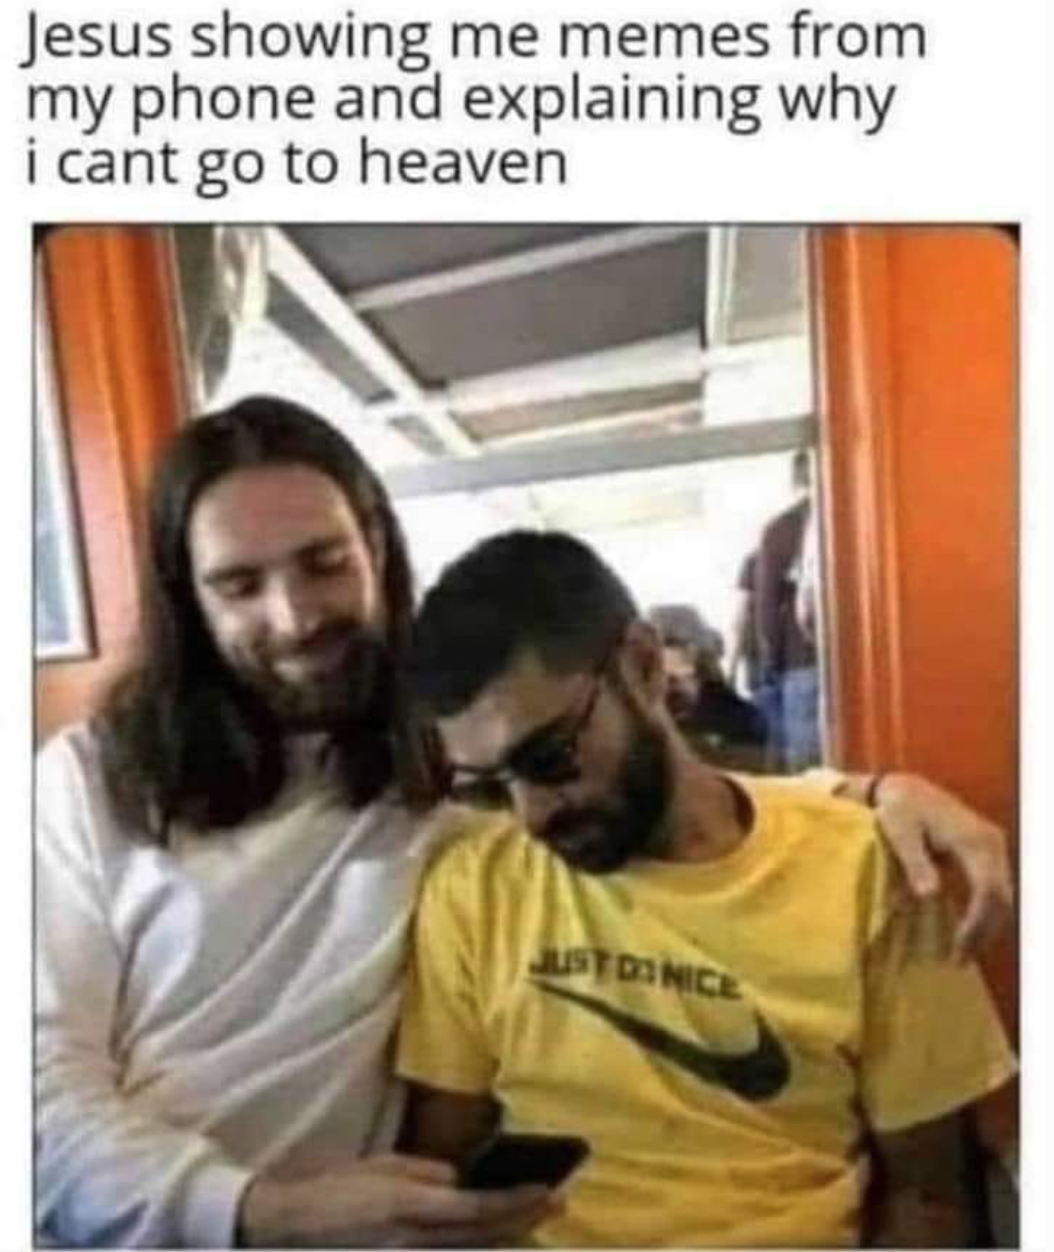 funny gaming memes - jesus showing me memes on my phone - Jesus showing me memes from my phone and explaining why i cant go to heaven Justdinice